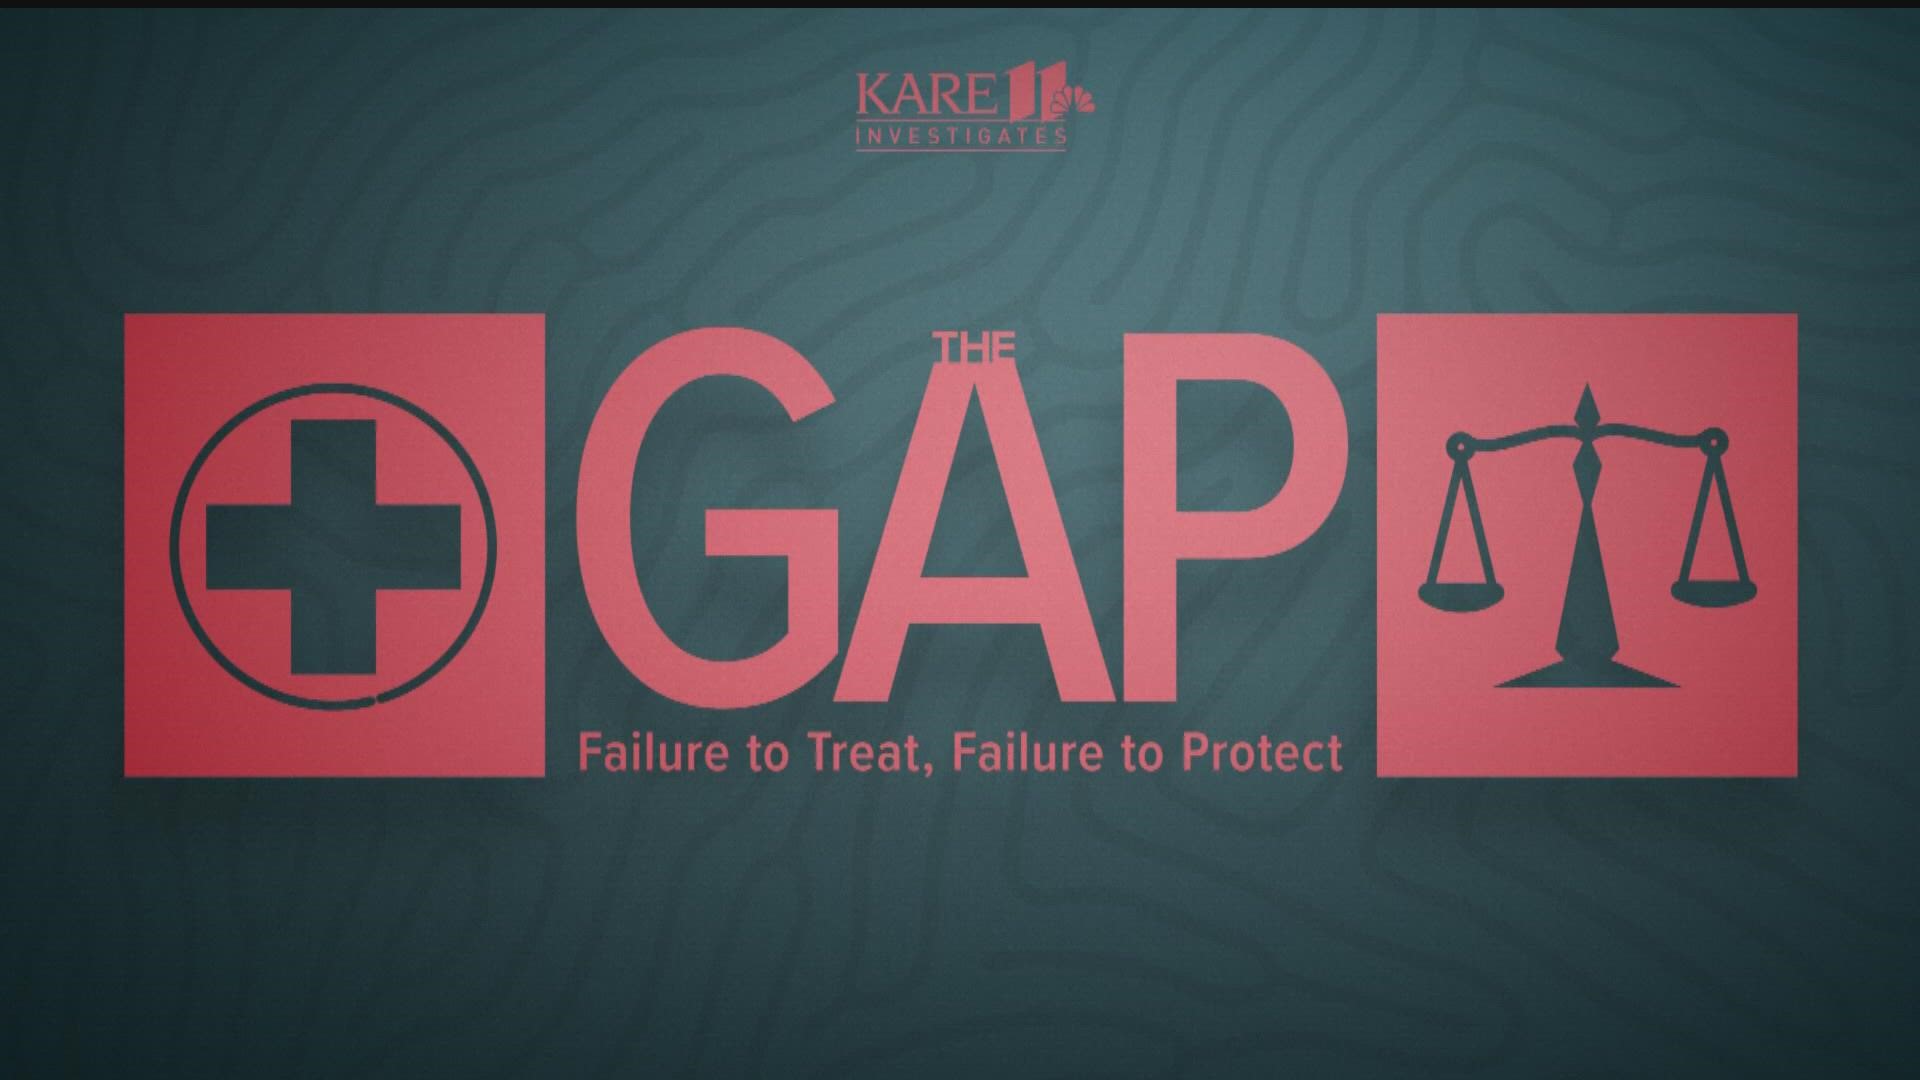 Legislators passed a new law and $32 million to close statewide “gaps” KARE 11 exposed that caused failures to treat and supervise mentally incompetent defendants.